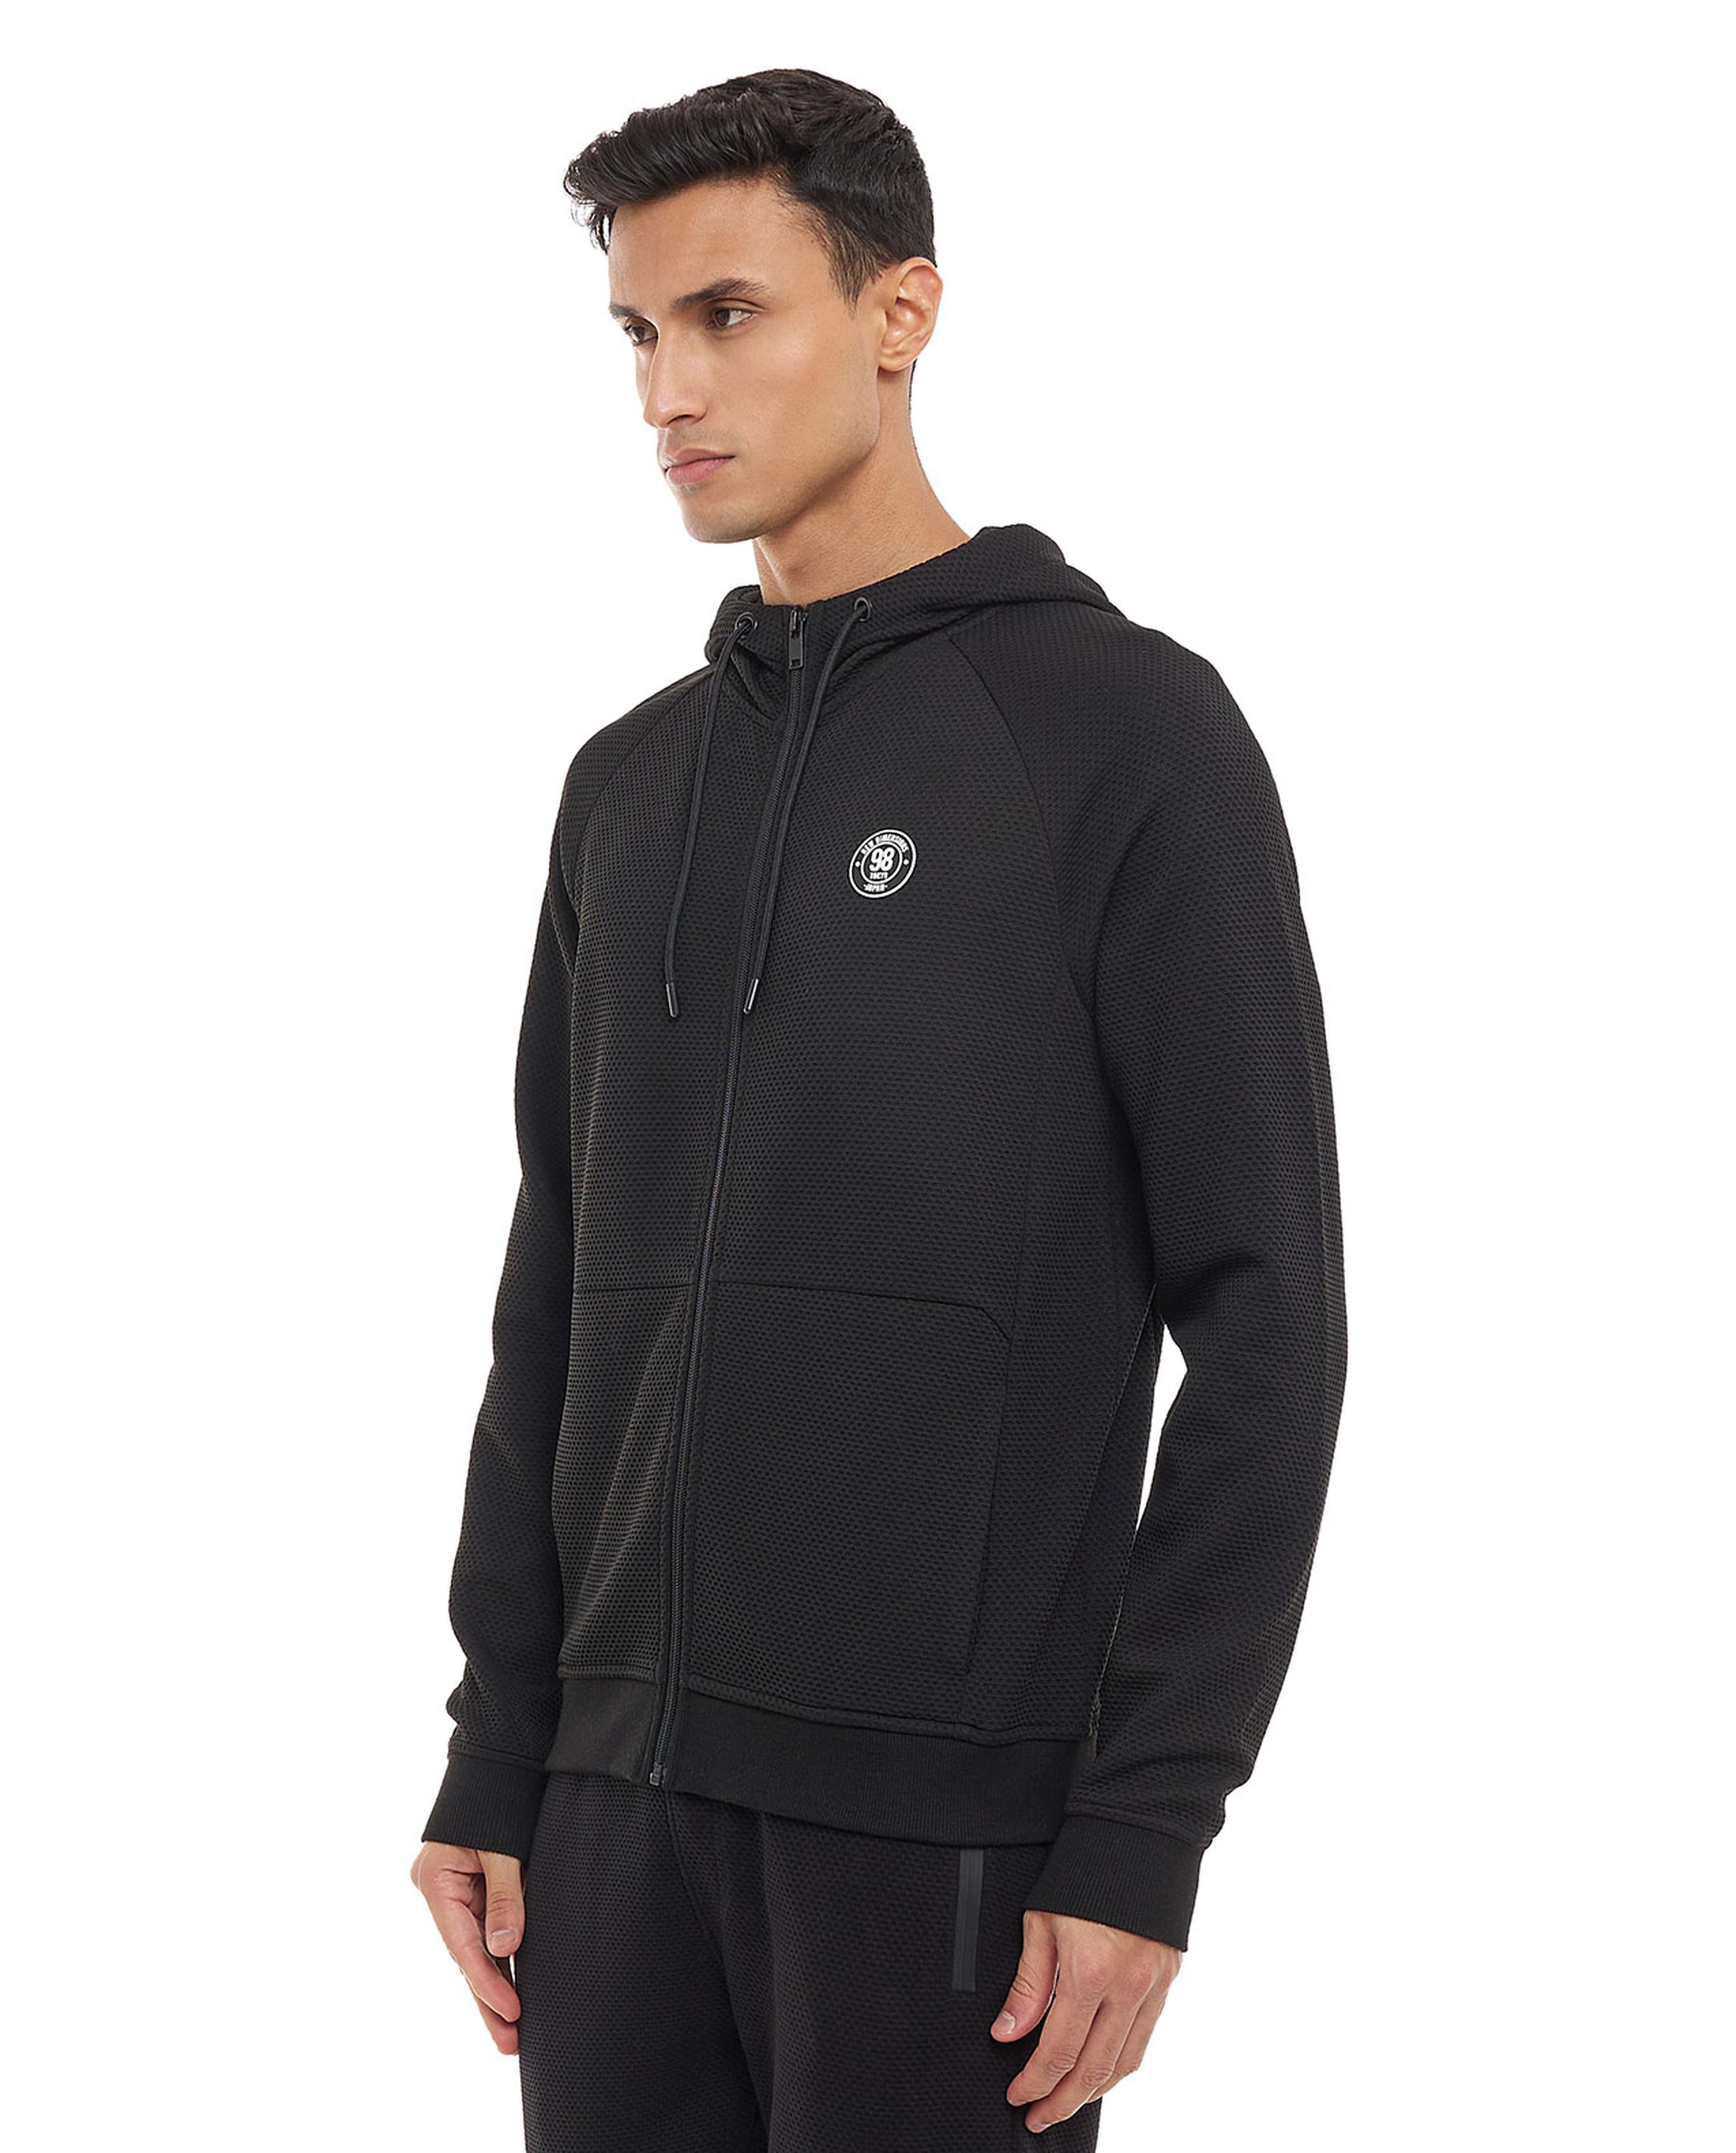 Perforated Hooded Active Jacket with Zipper Closure